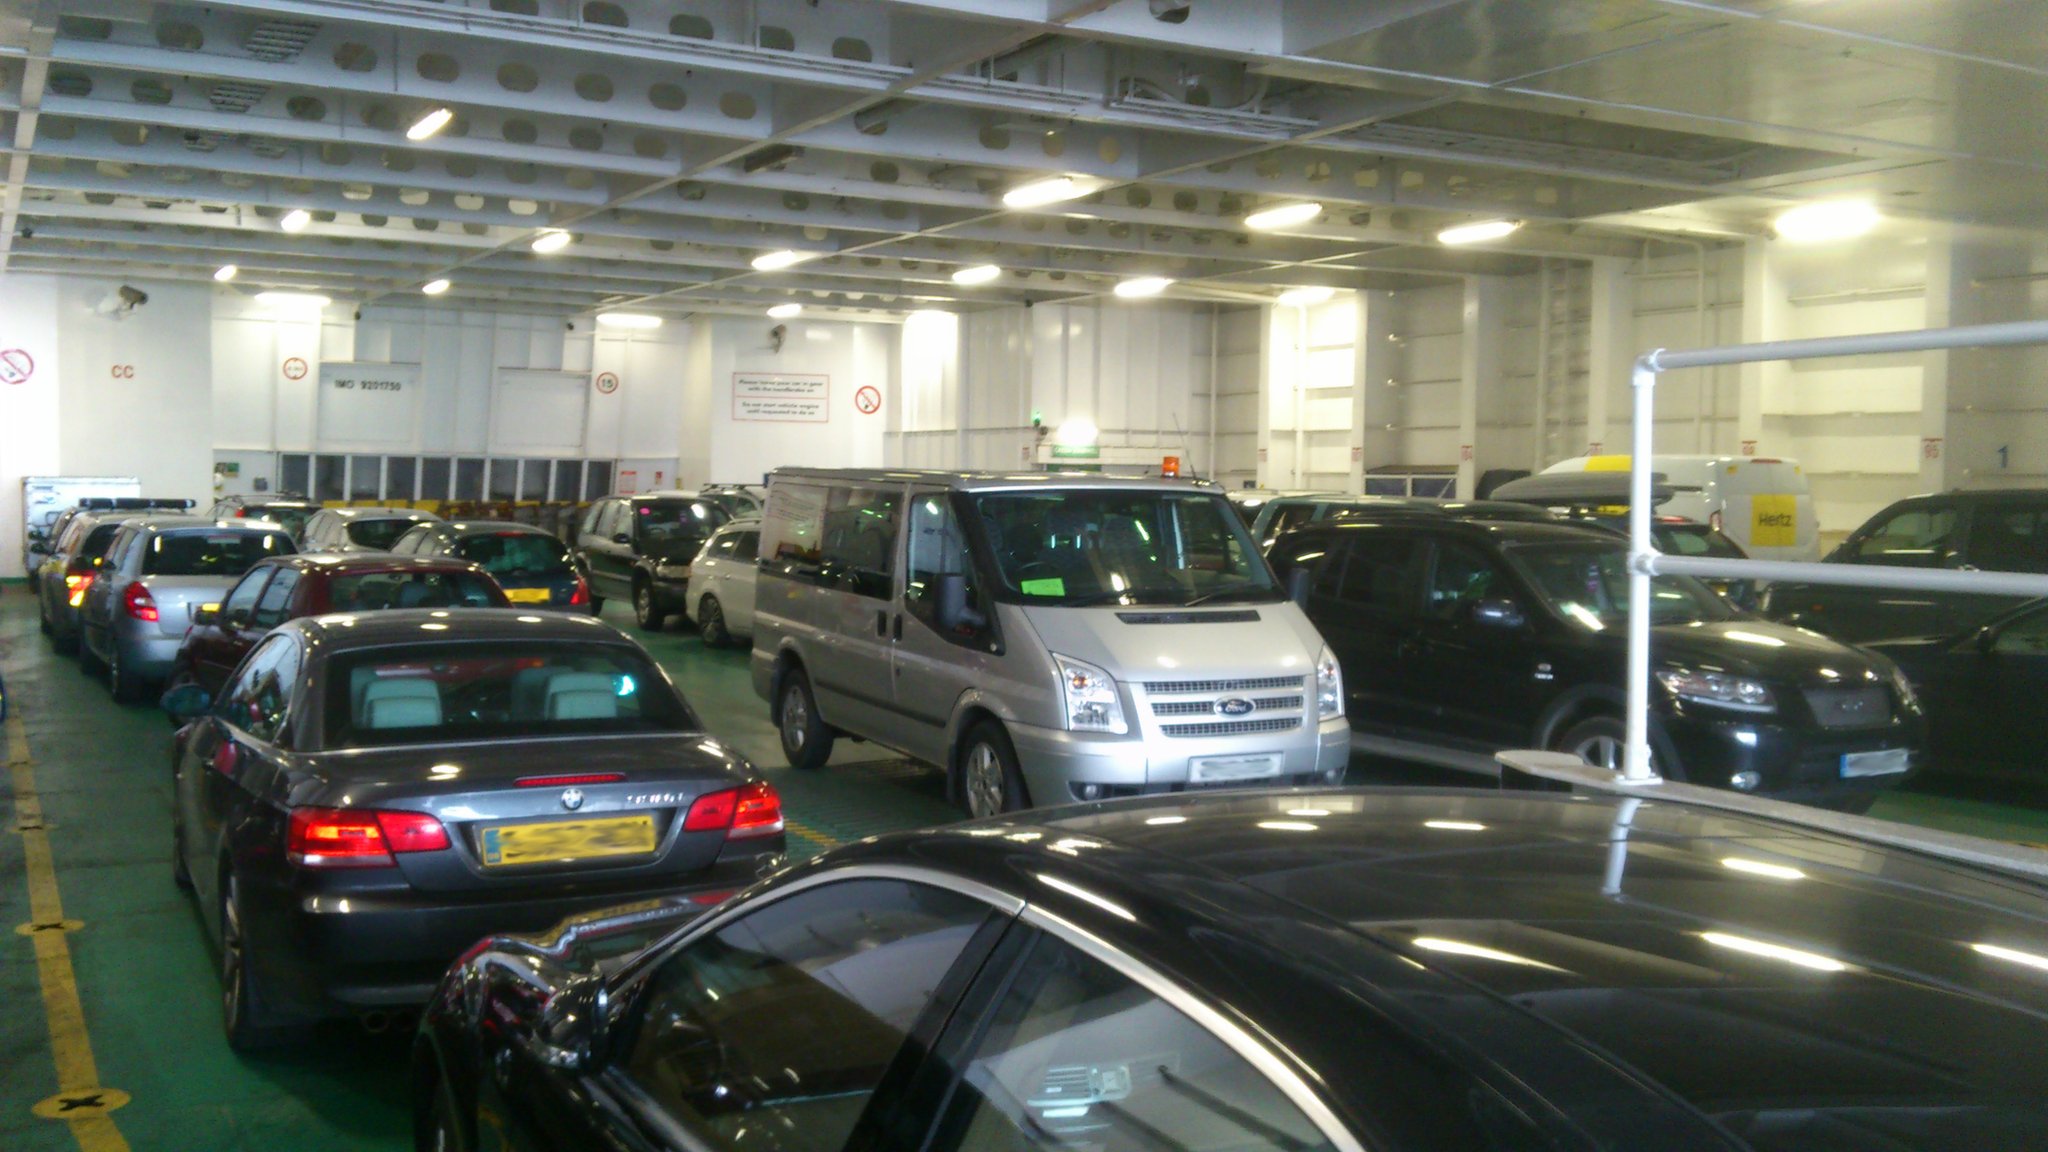 Hijsen gehandicapt Stationair Fault left cars stuck on Condor ferry in Portsmouth for 12 hours - BBC News